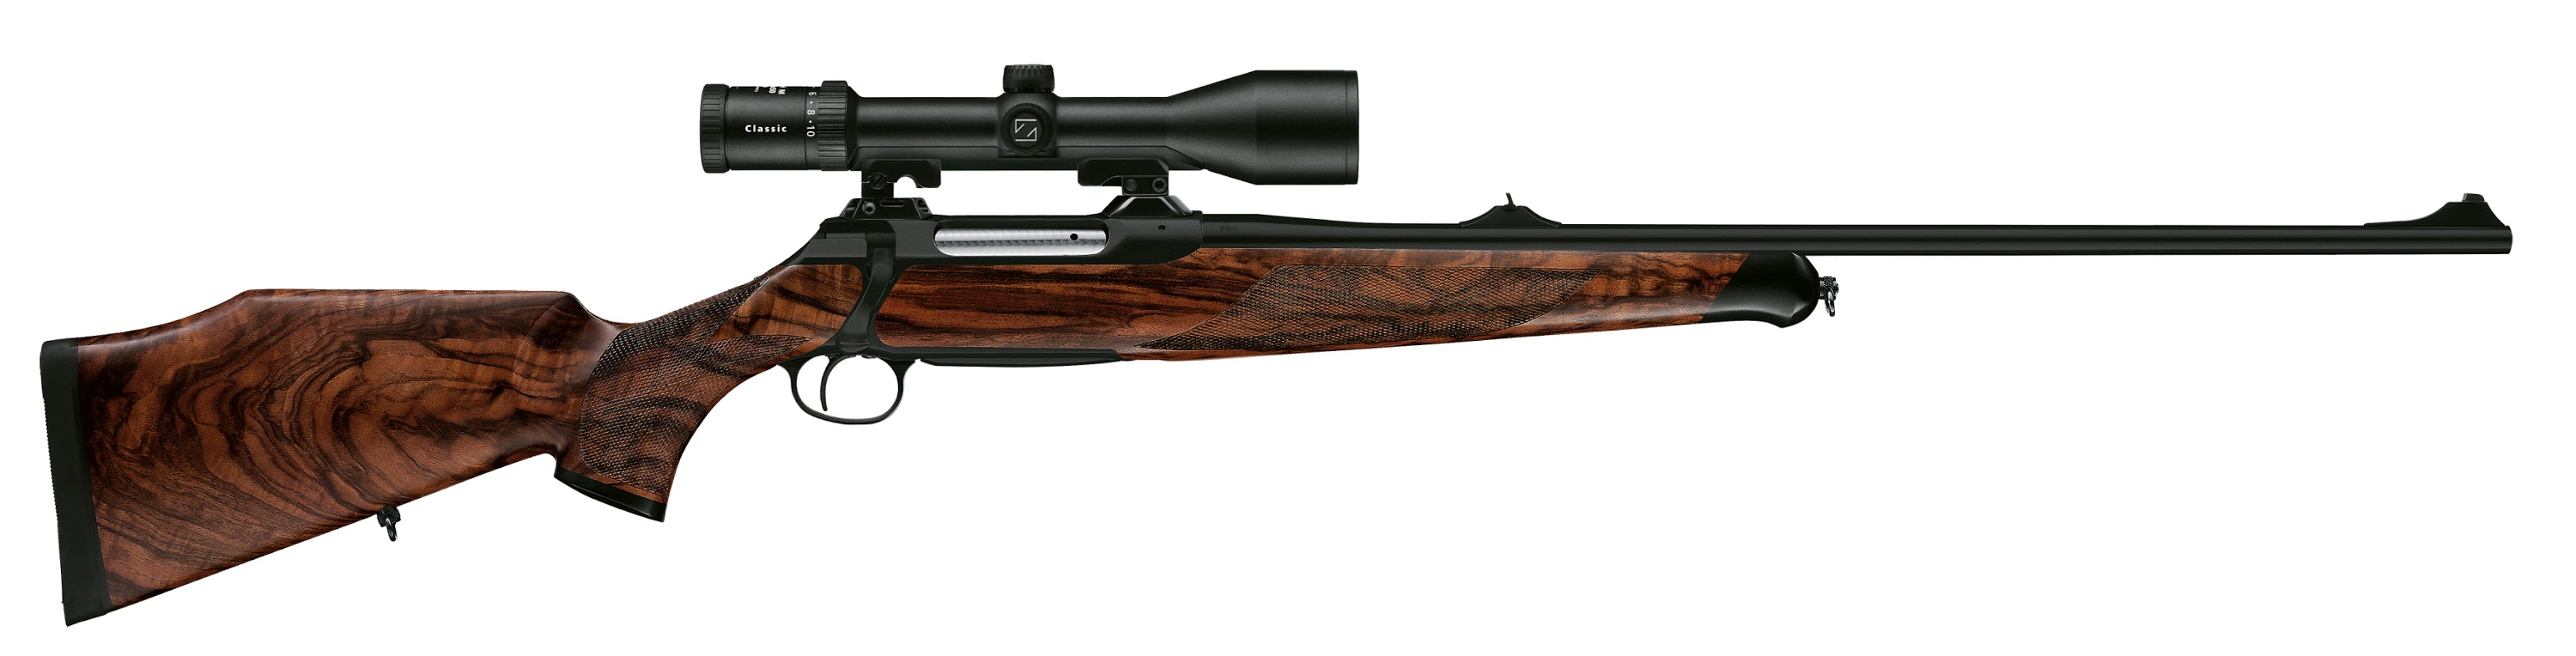 Sauer S 202 Limited Edition 260